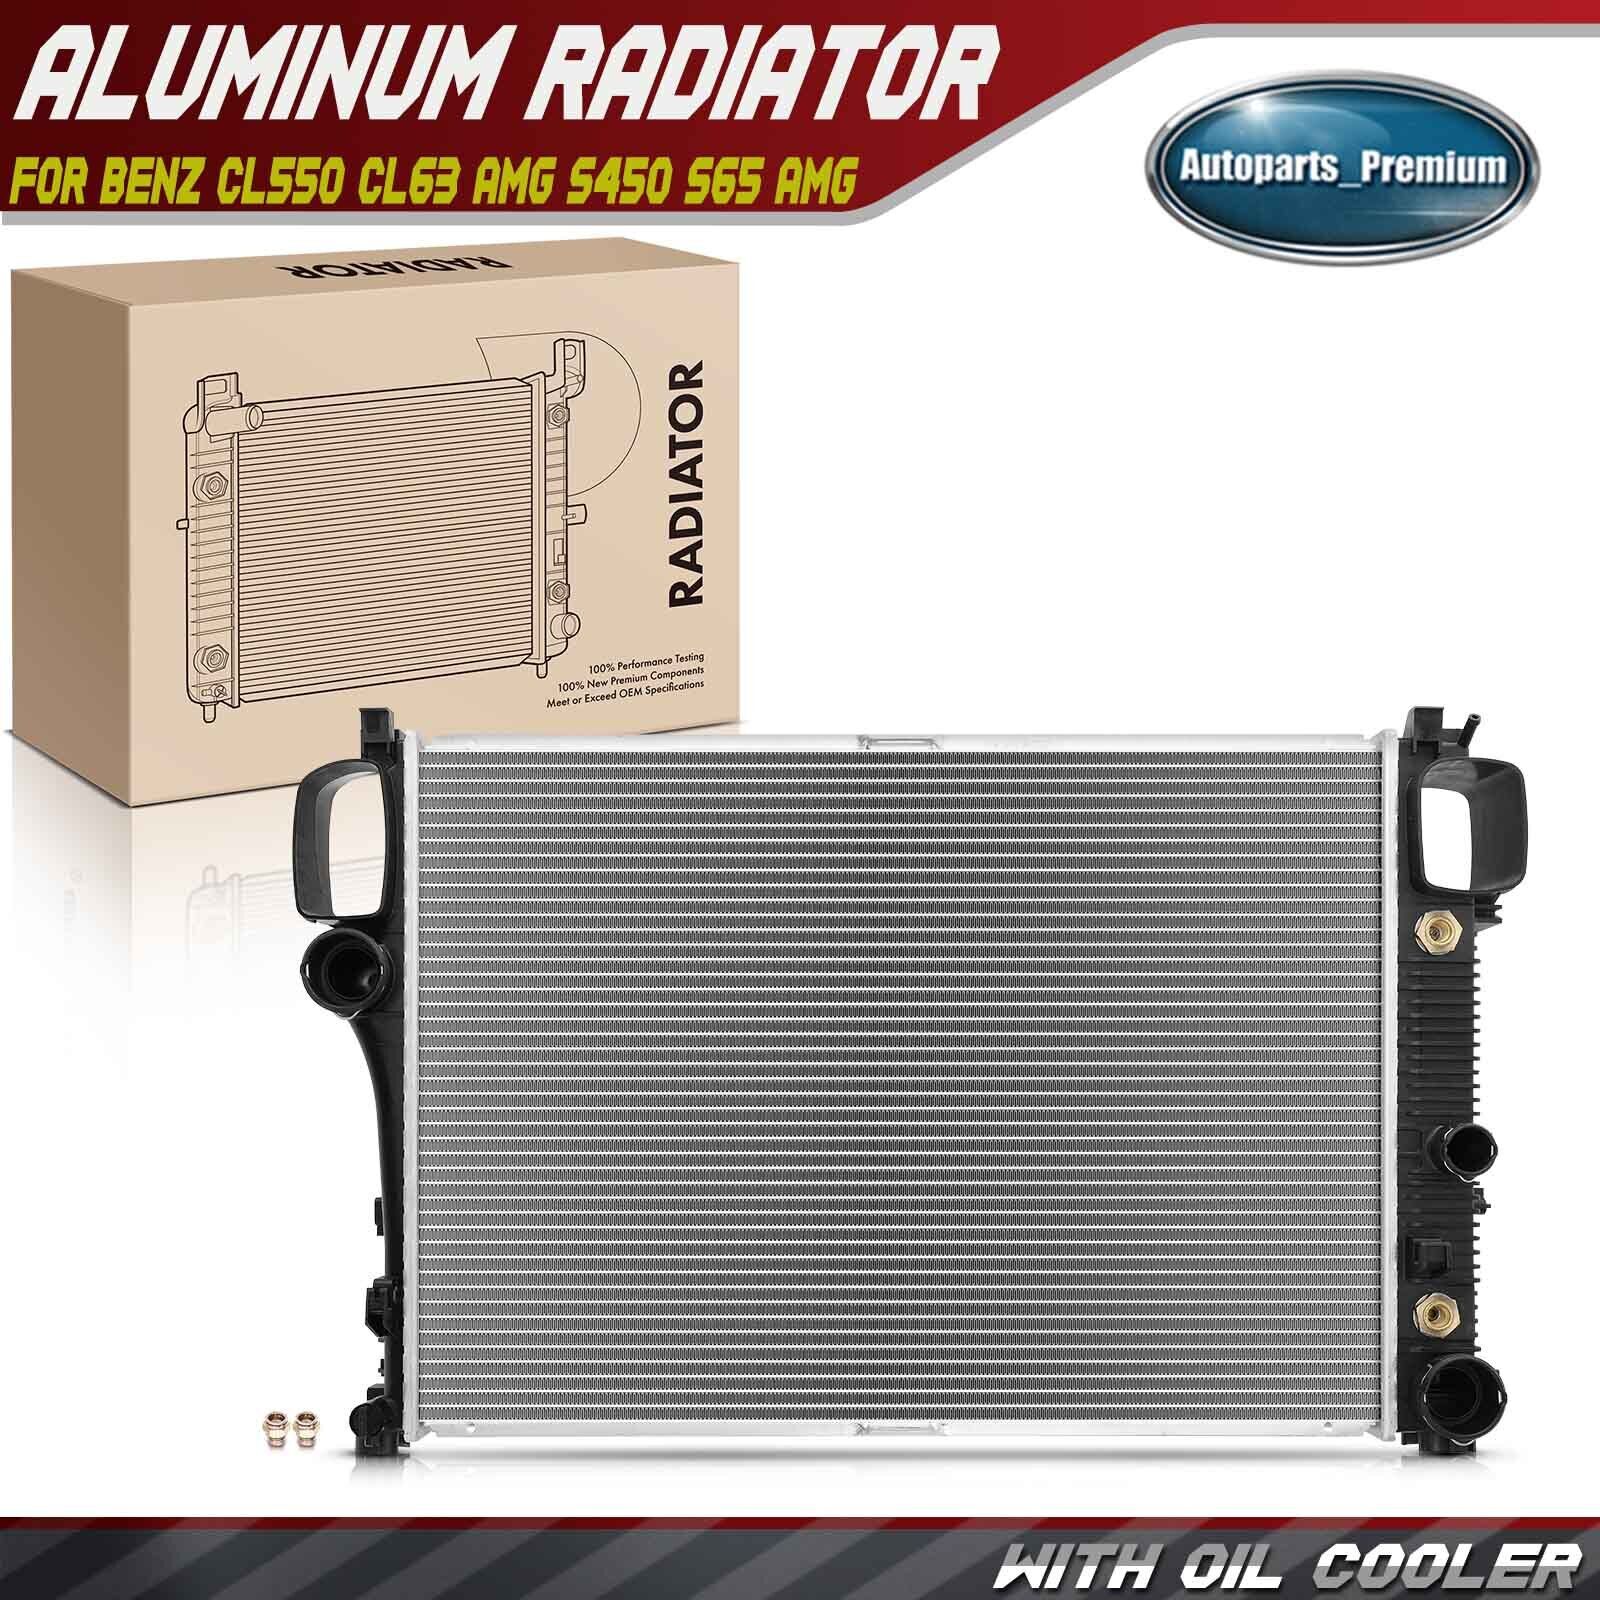 Radiator w/ Trans Oil Cooler for Mercedes-Benz CL550 07-10 CL63 AMG S450 S65 AMG